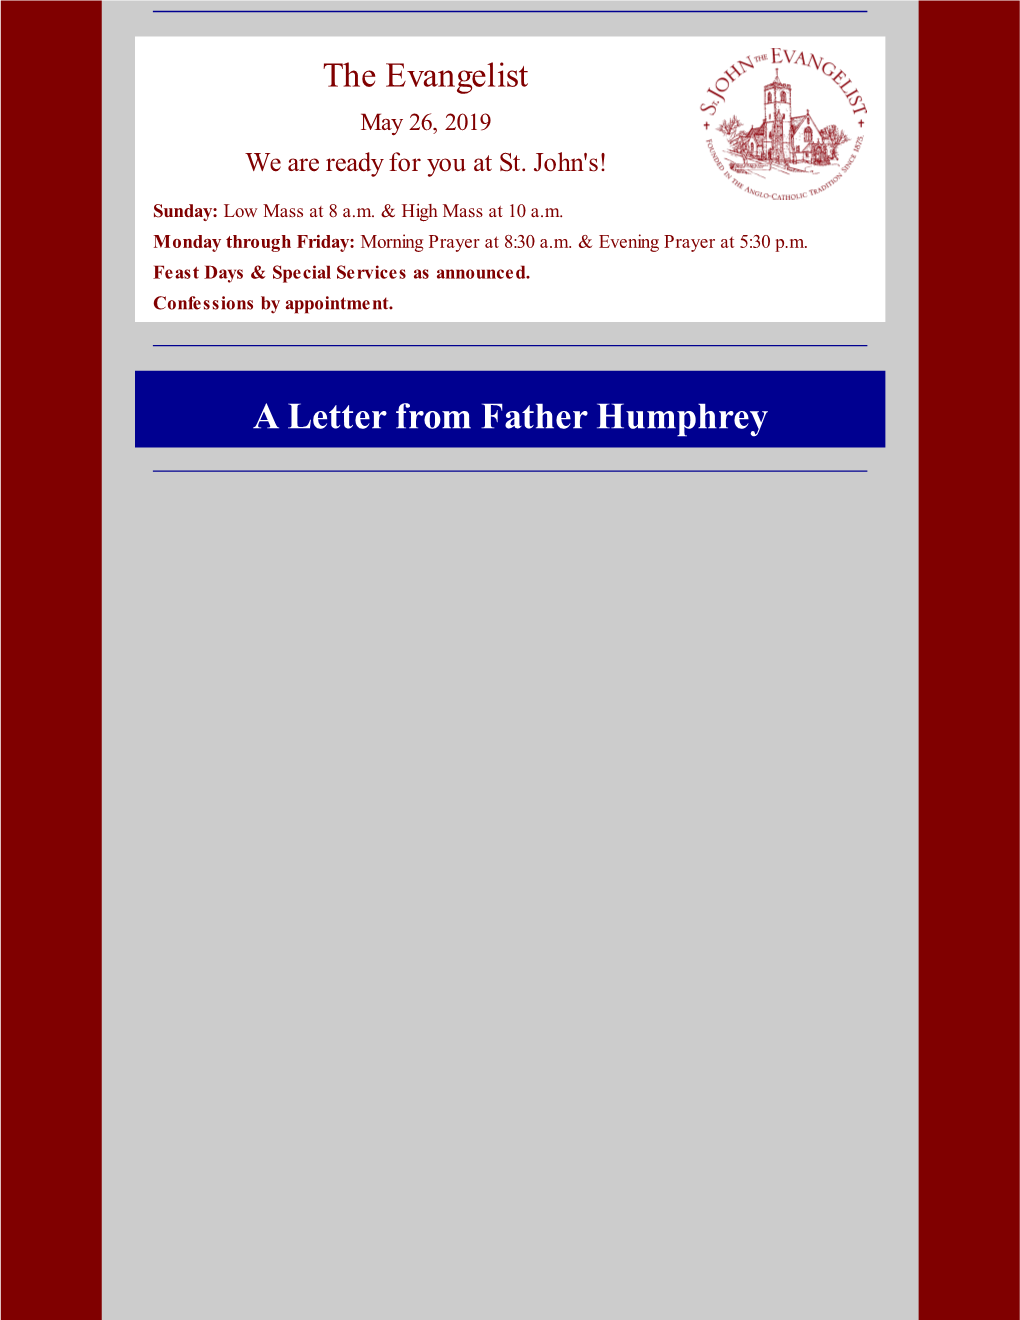 A Letter from Father Humphrey Dear People, Neighbors, and Friends of St